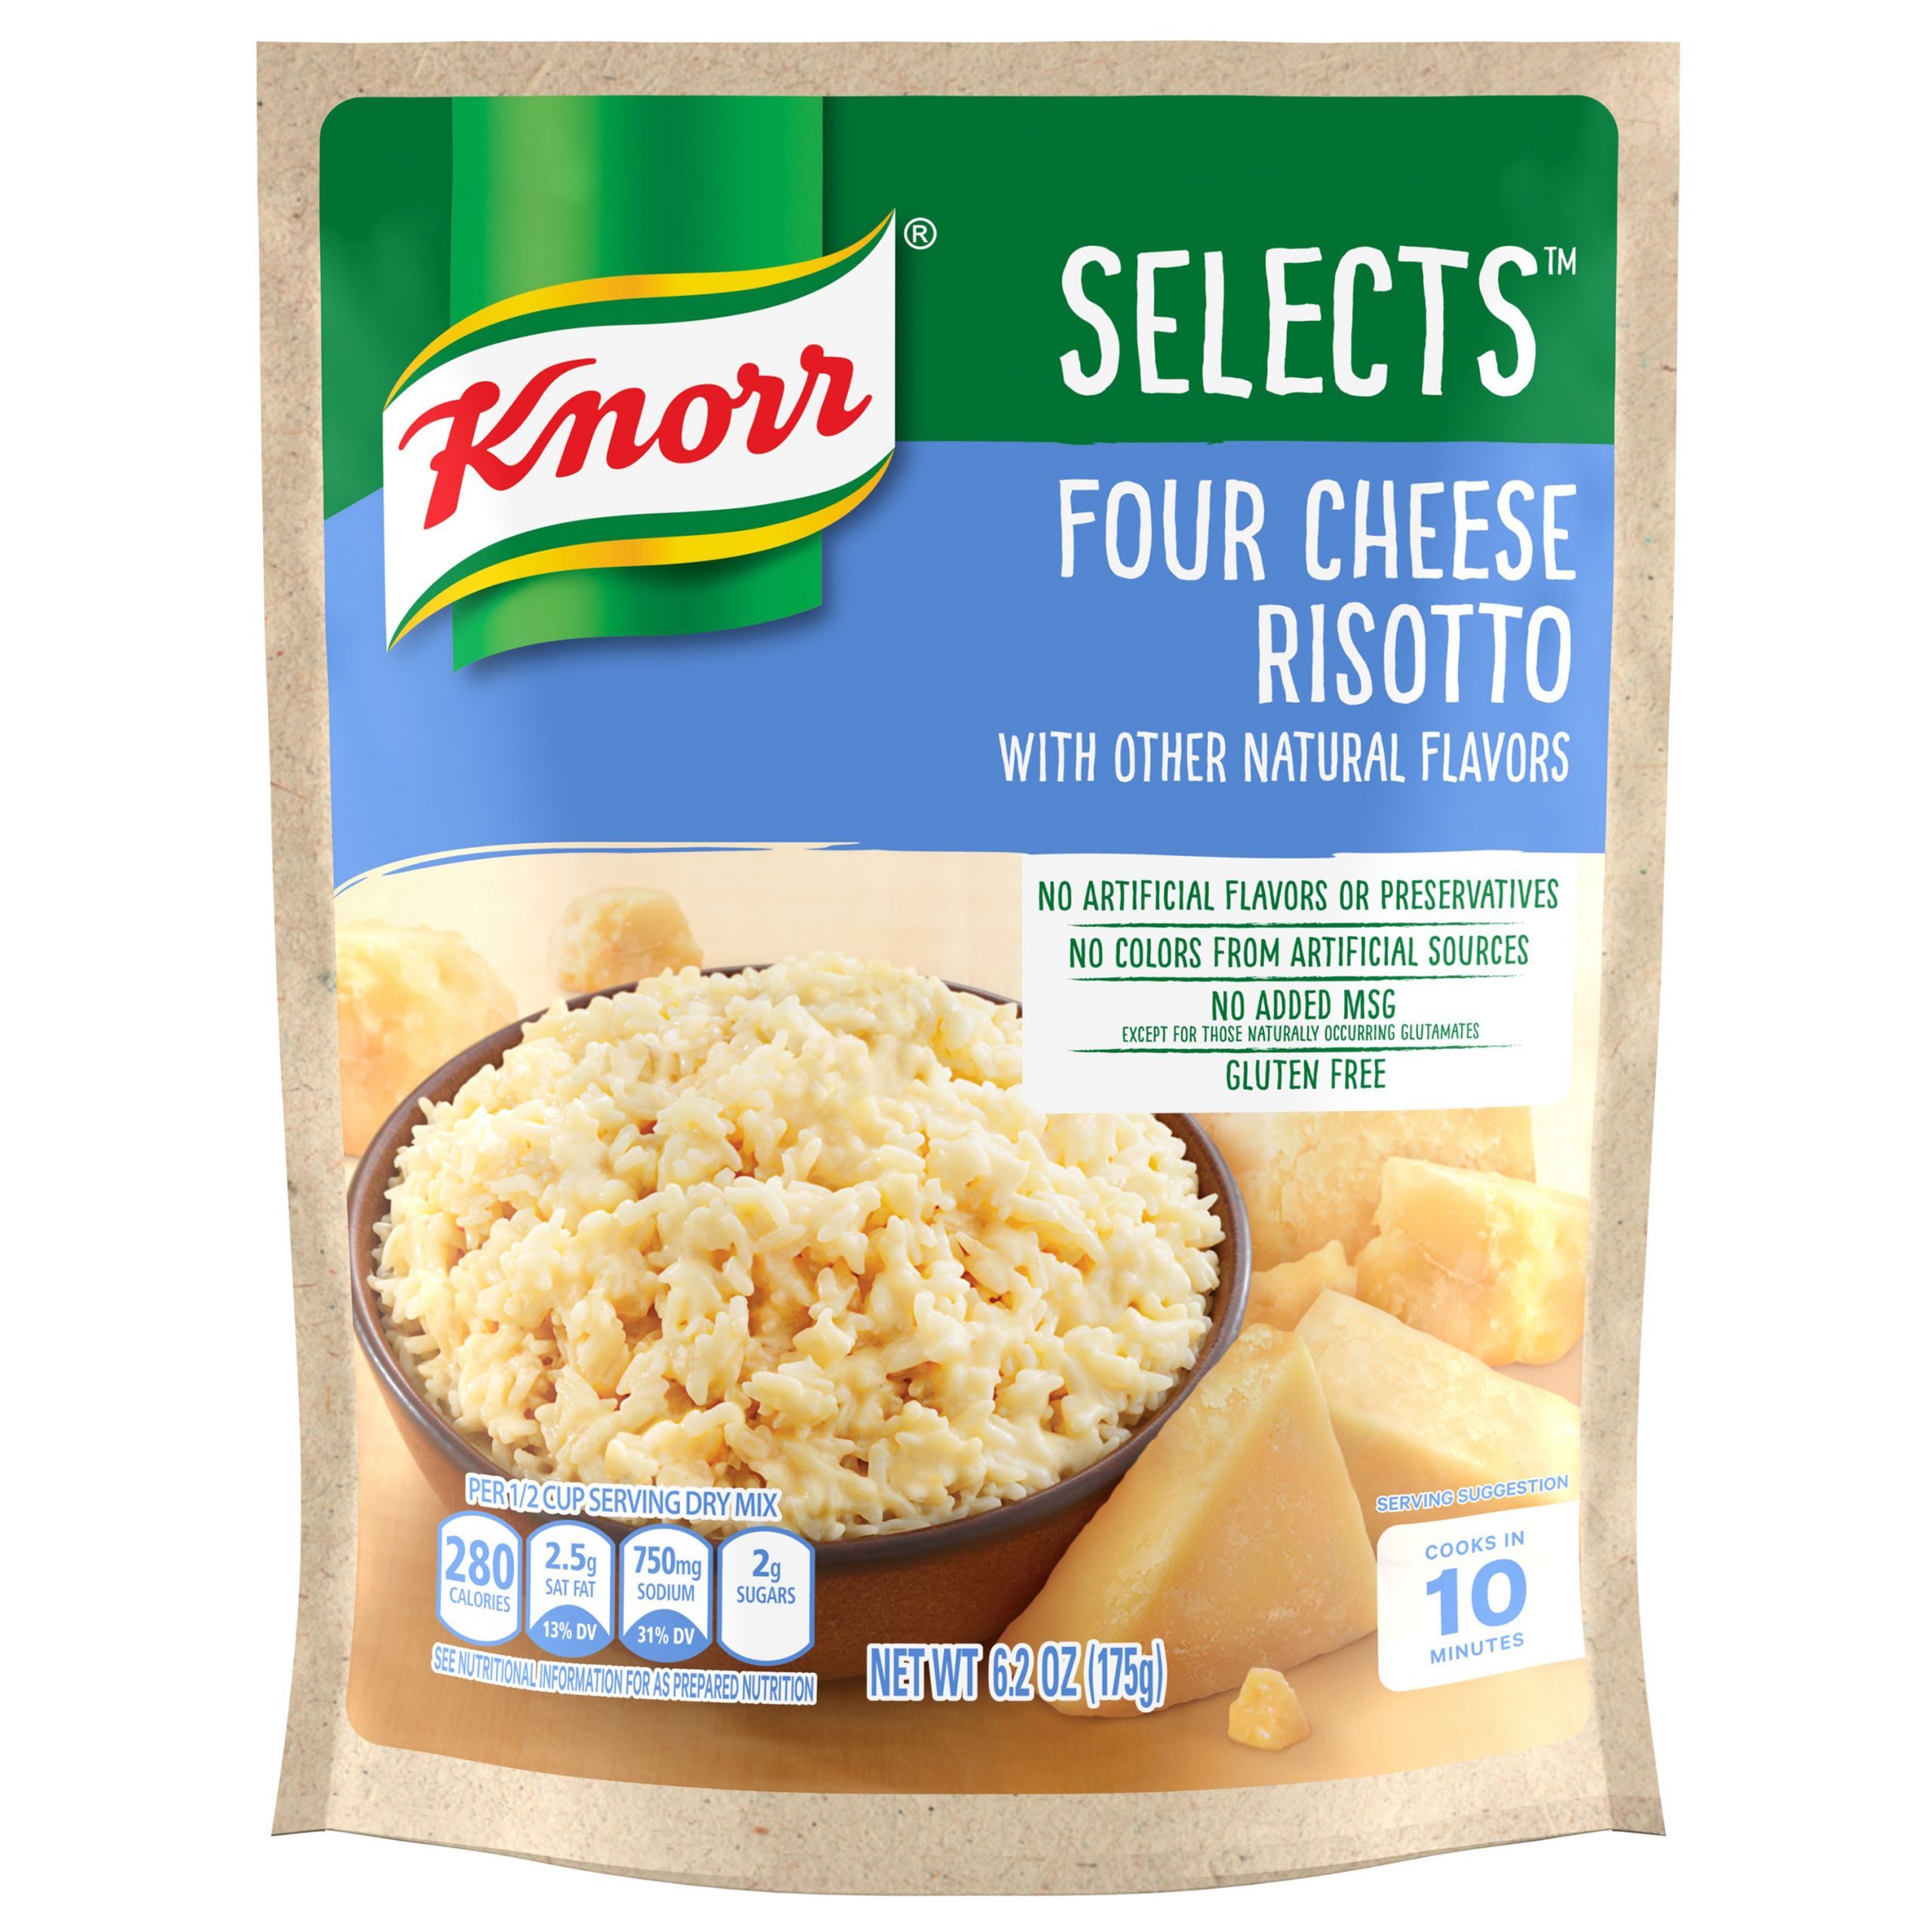 Risotto Side Dish
 3 Pack Knorr Selects Four Cheese Risotto Rice Side Dish